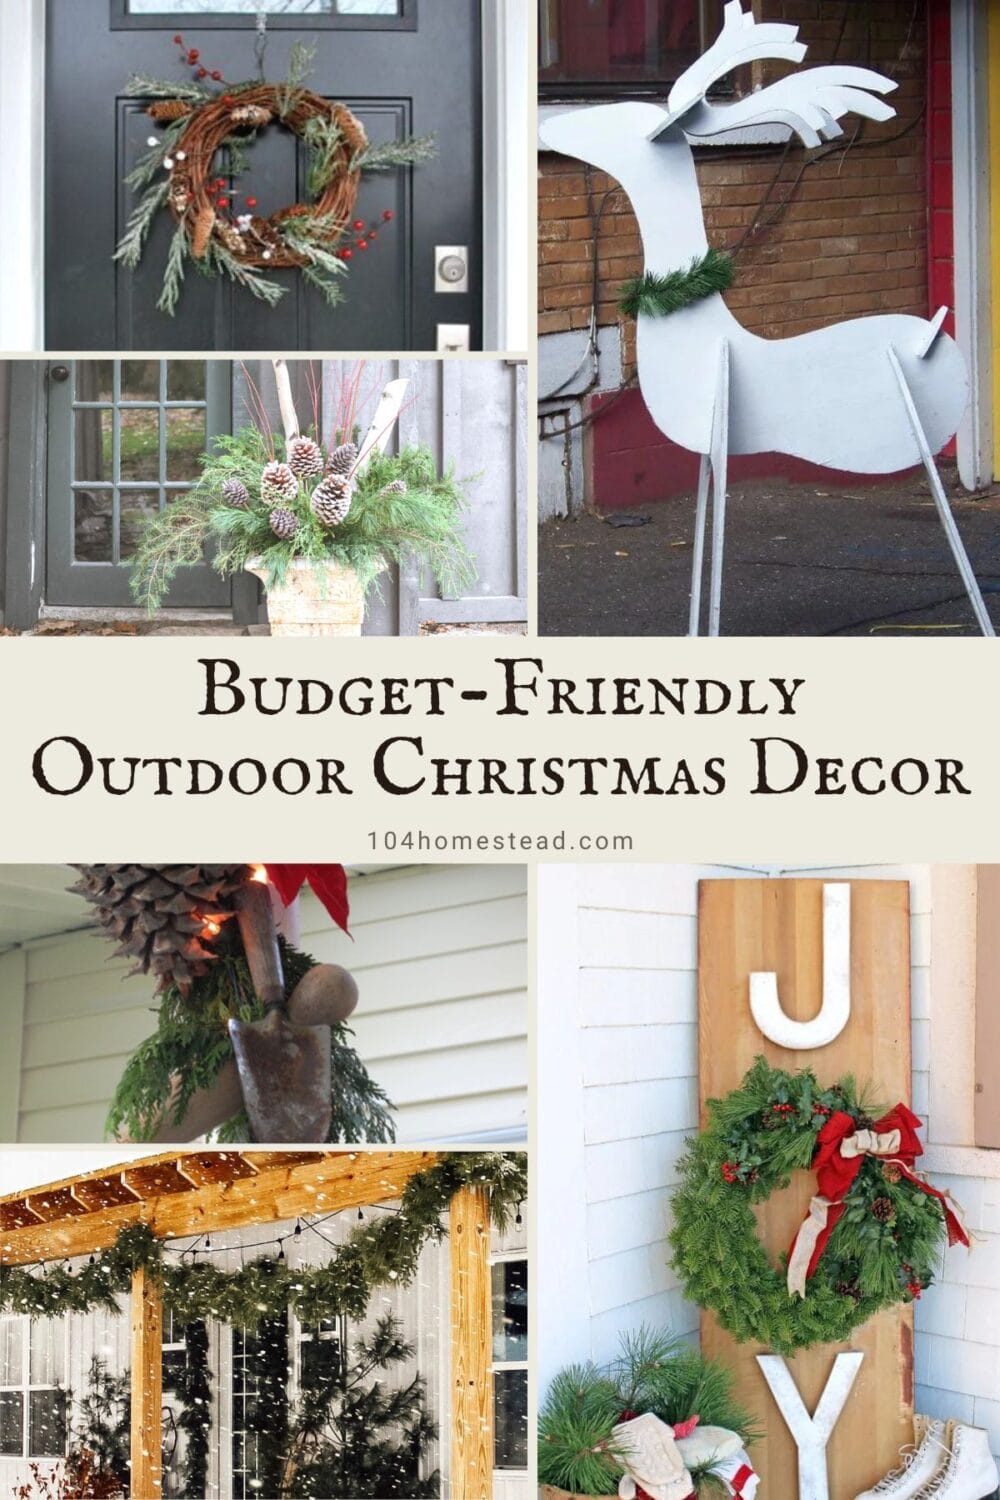 A Pintersest-friendly graphic for my outdoor homestead holiday decor roundup.